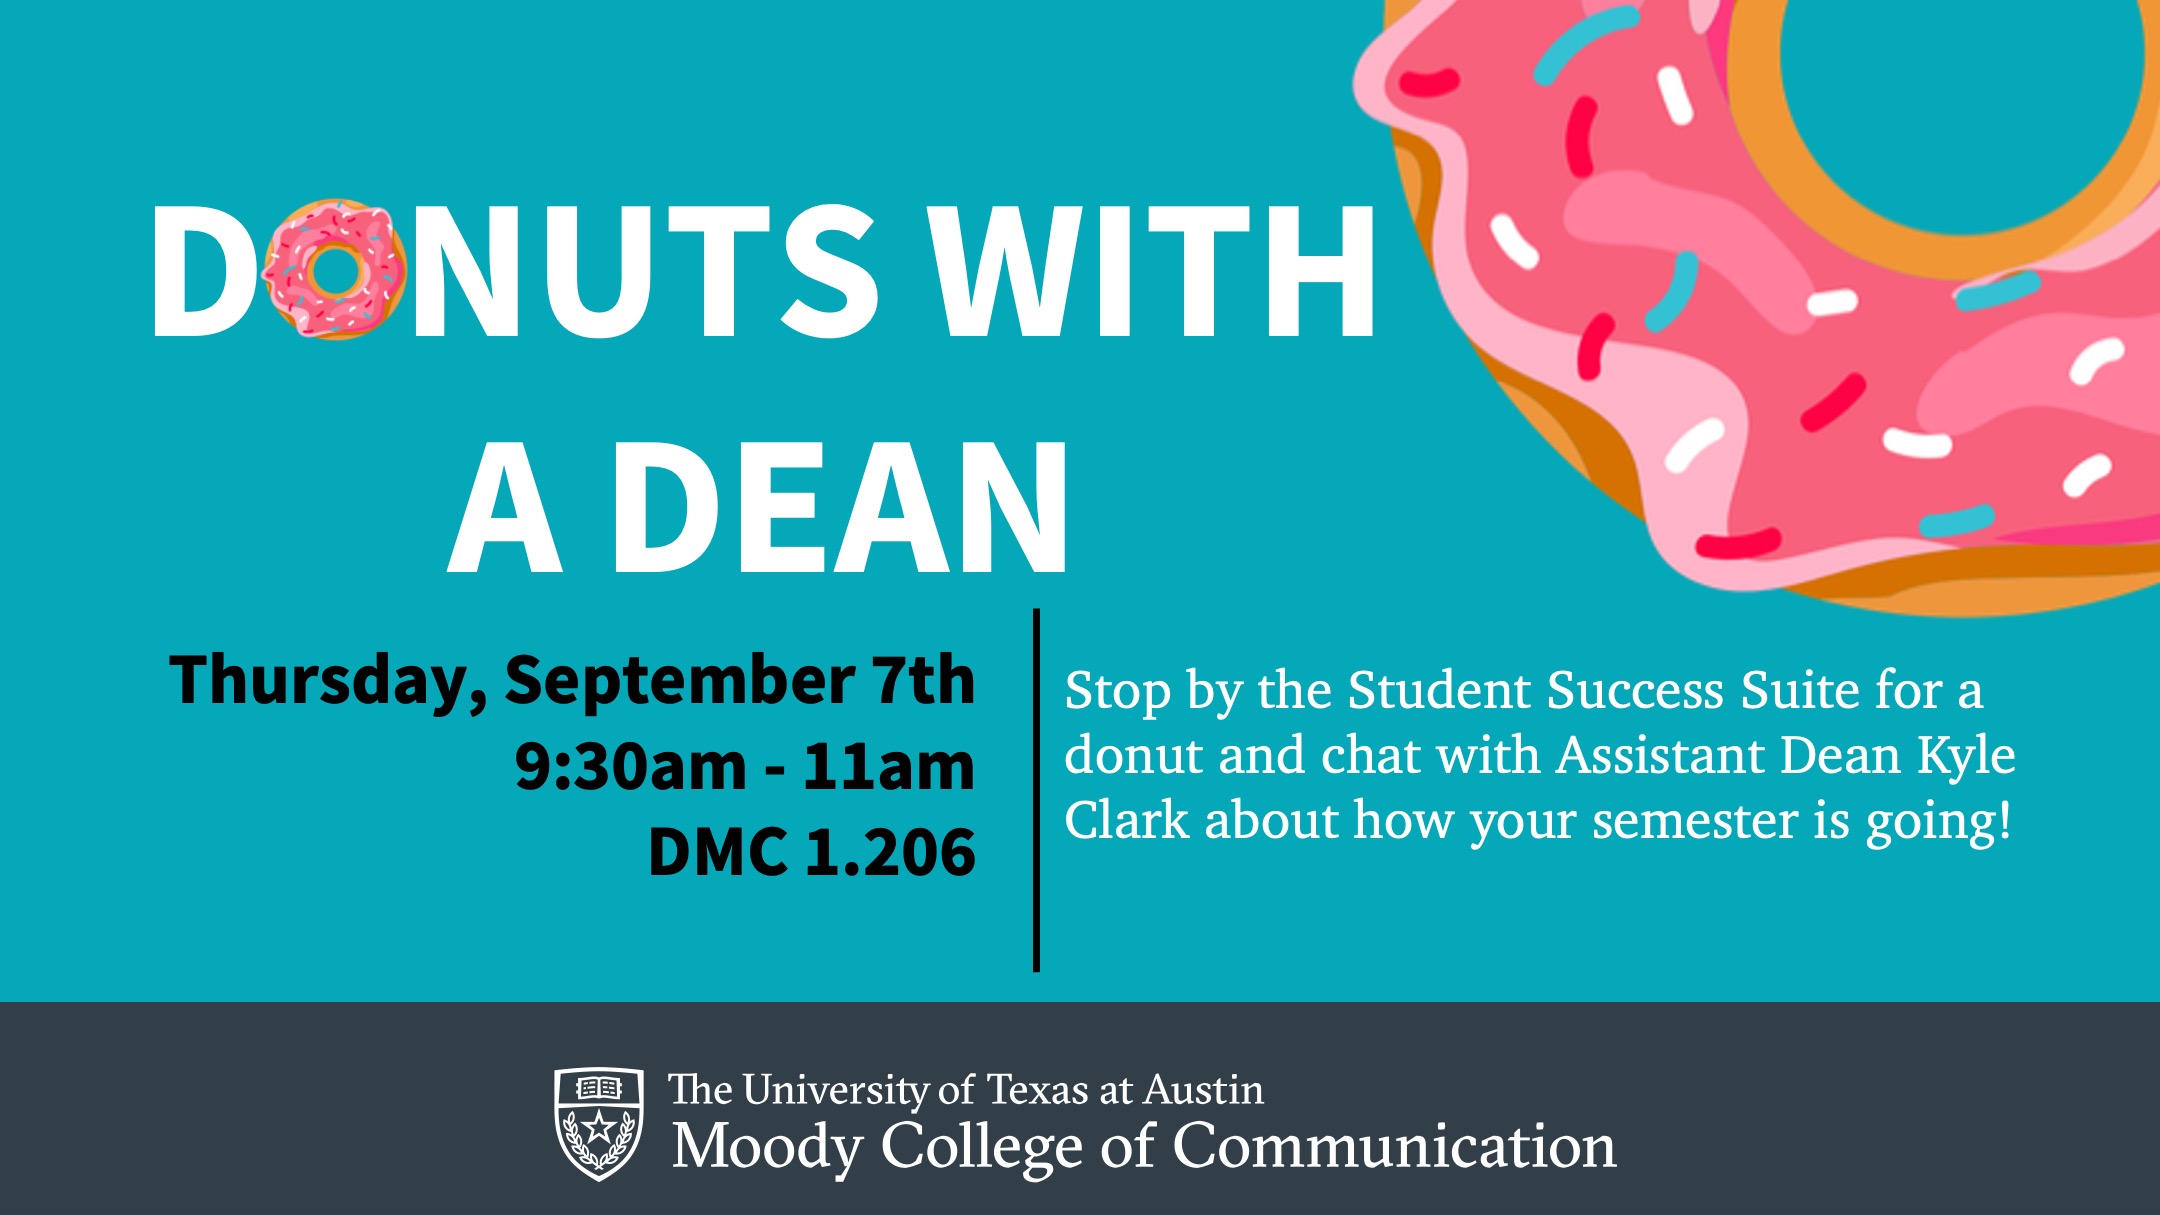 image of donut with Donuts with a Dean event details